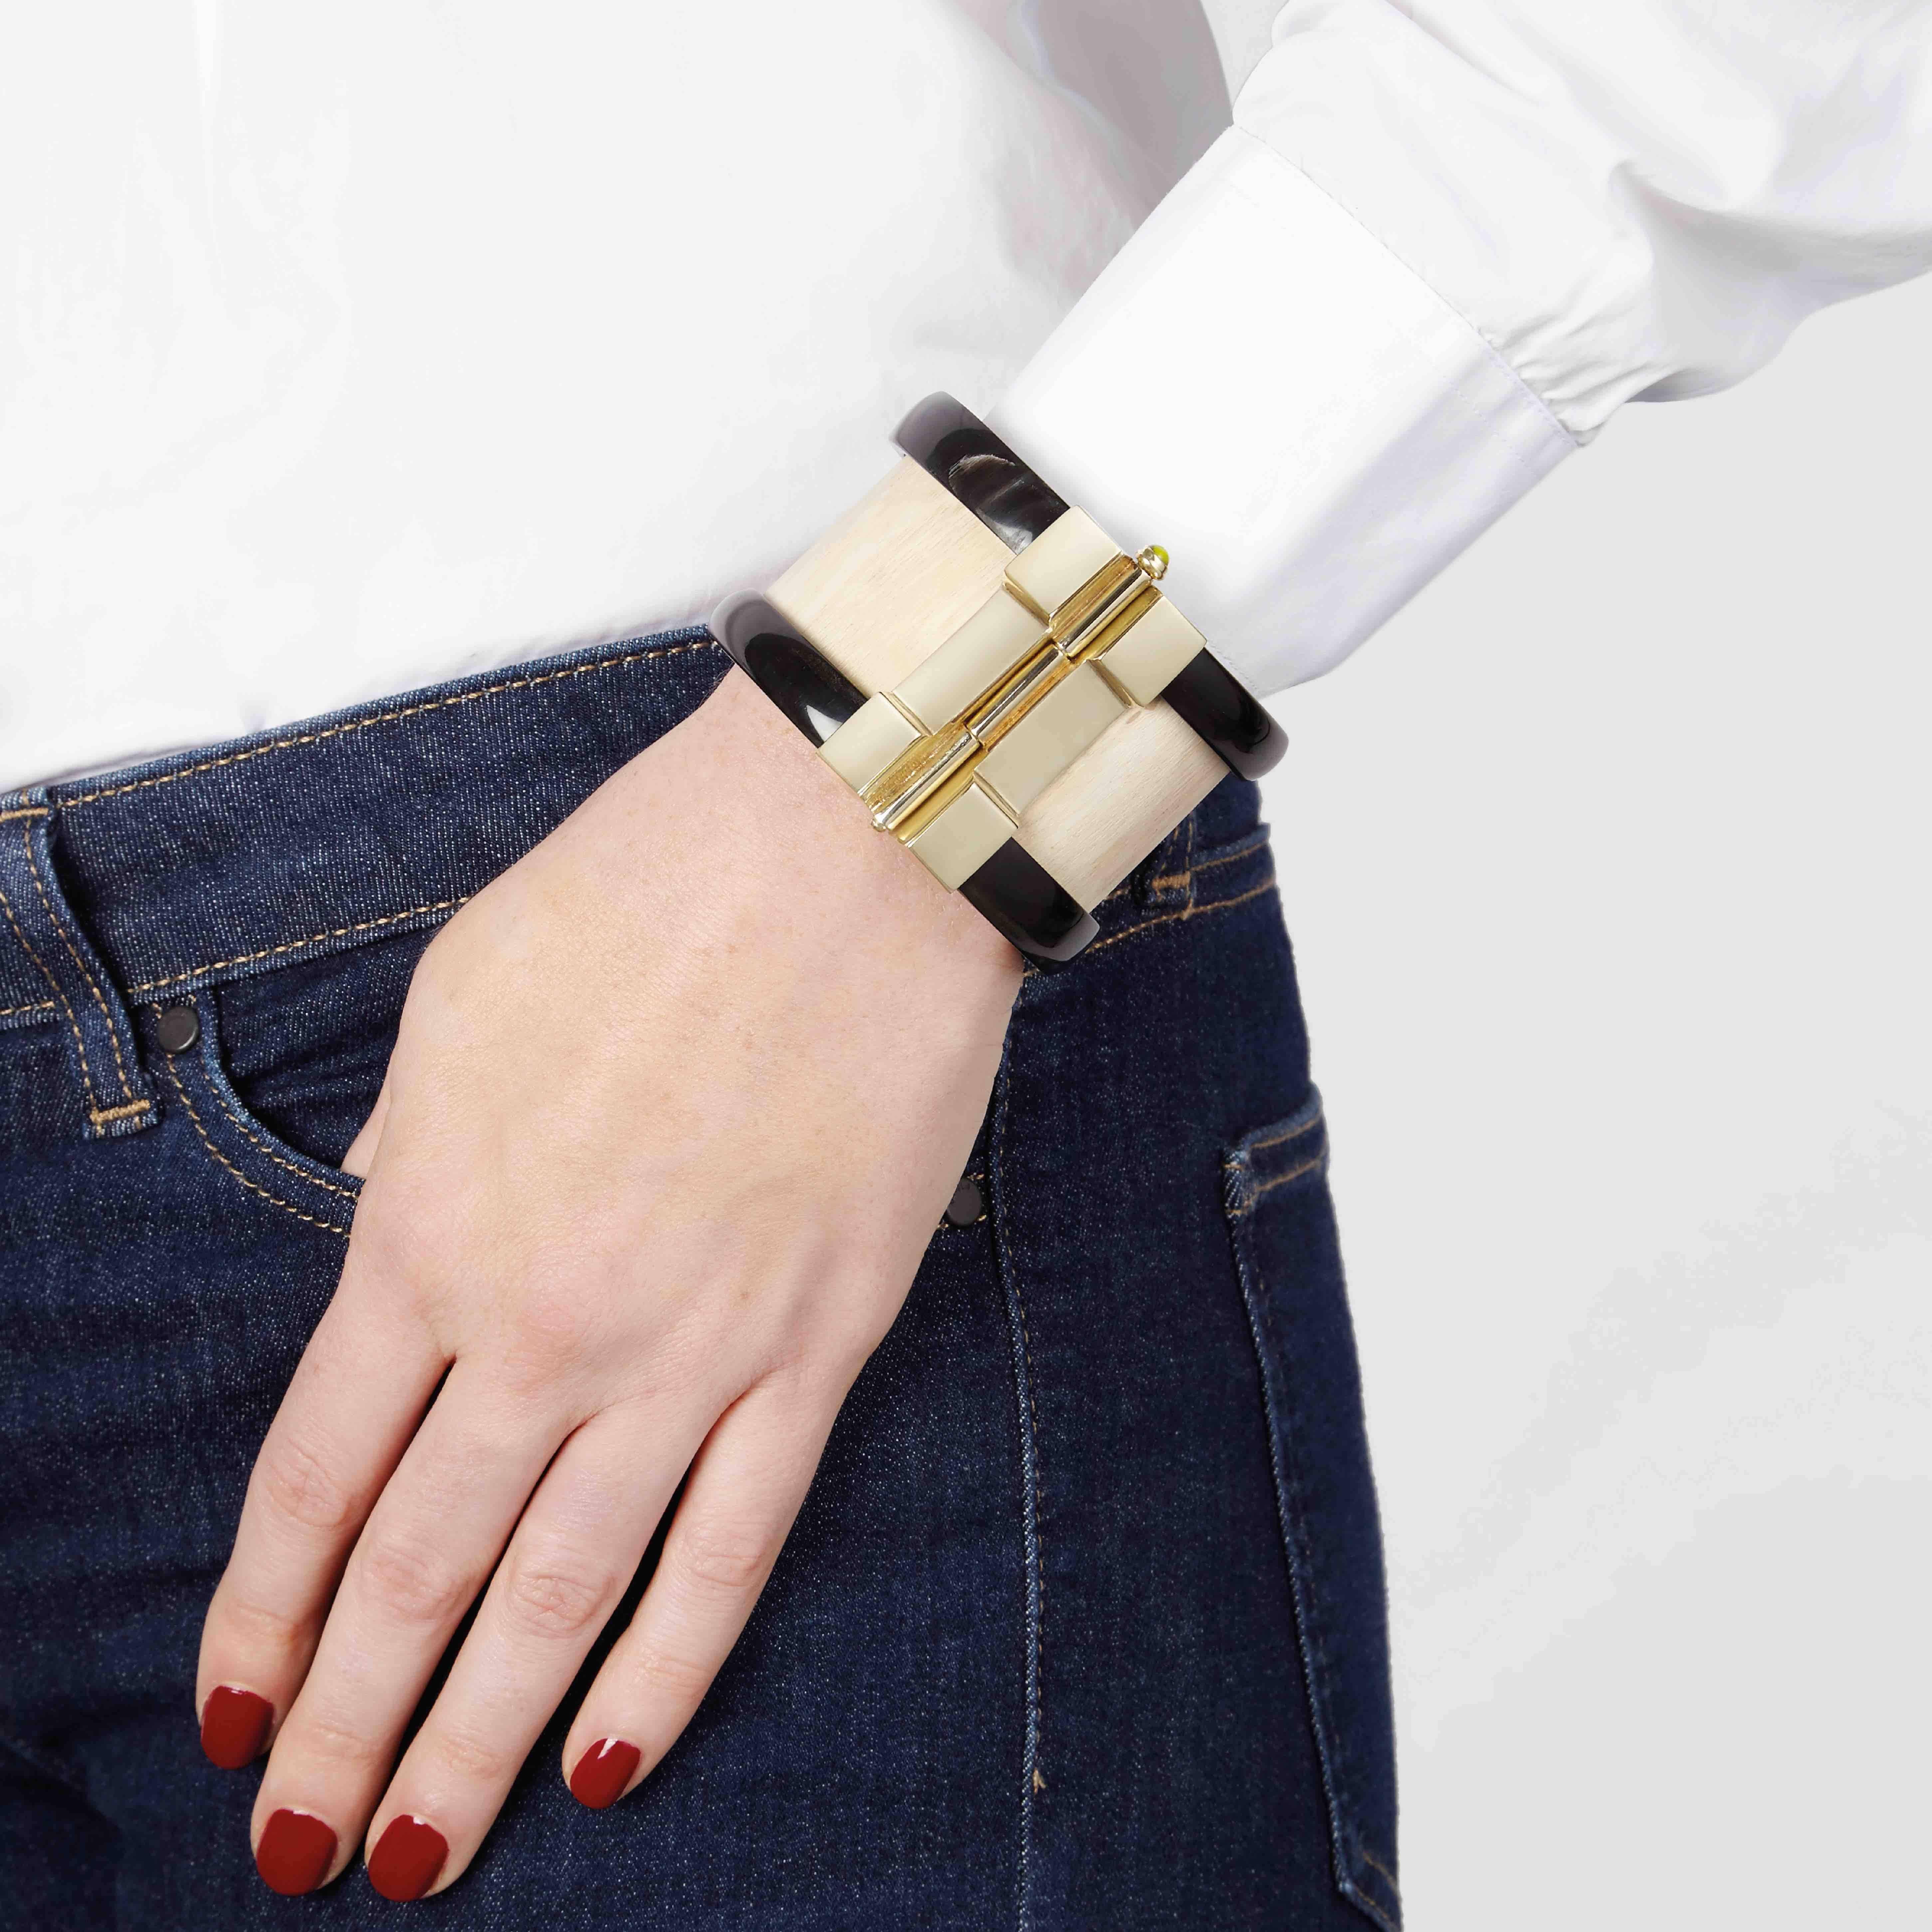 Cuff bracelet crafted by hand from jacaranda wood and African cow horn. The customizable 18k gold plated pin-clasp is set with choice or green peridot, ruby or emerald. Inspired by warrior style cuffs worn by former Vogue editor Diana Vreeland.